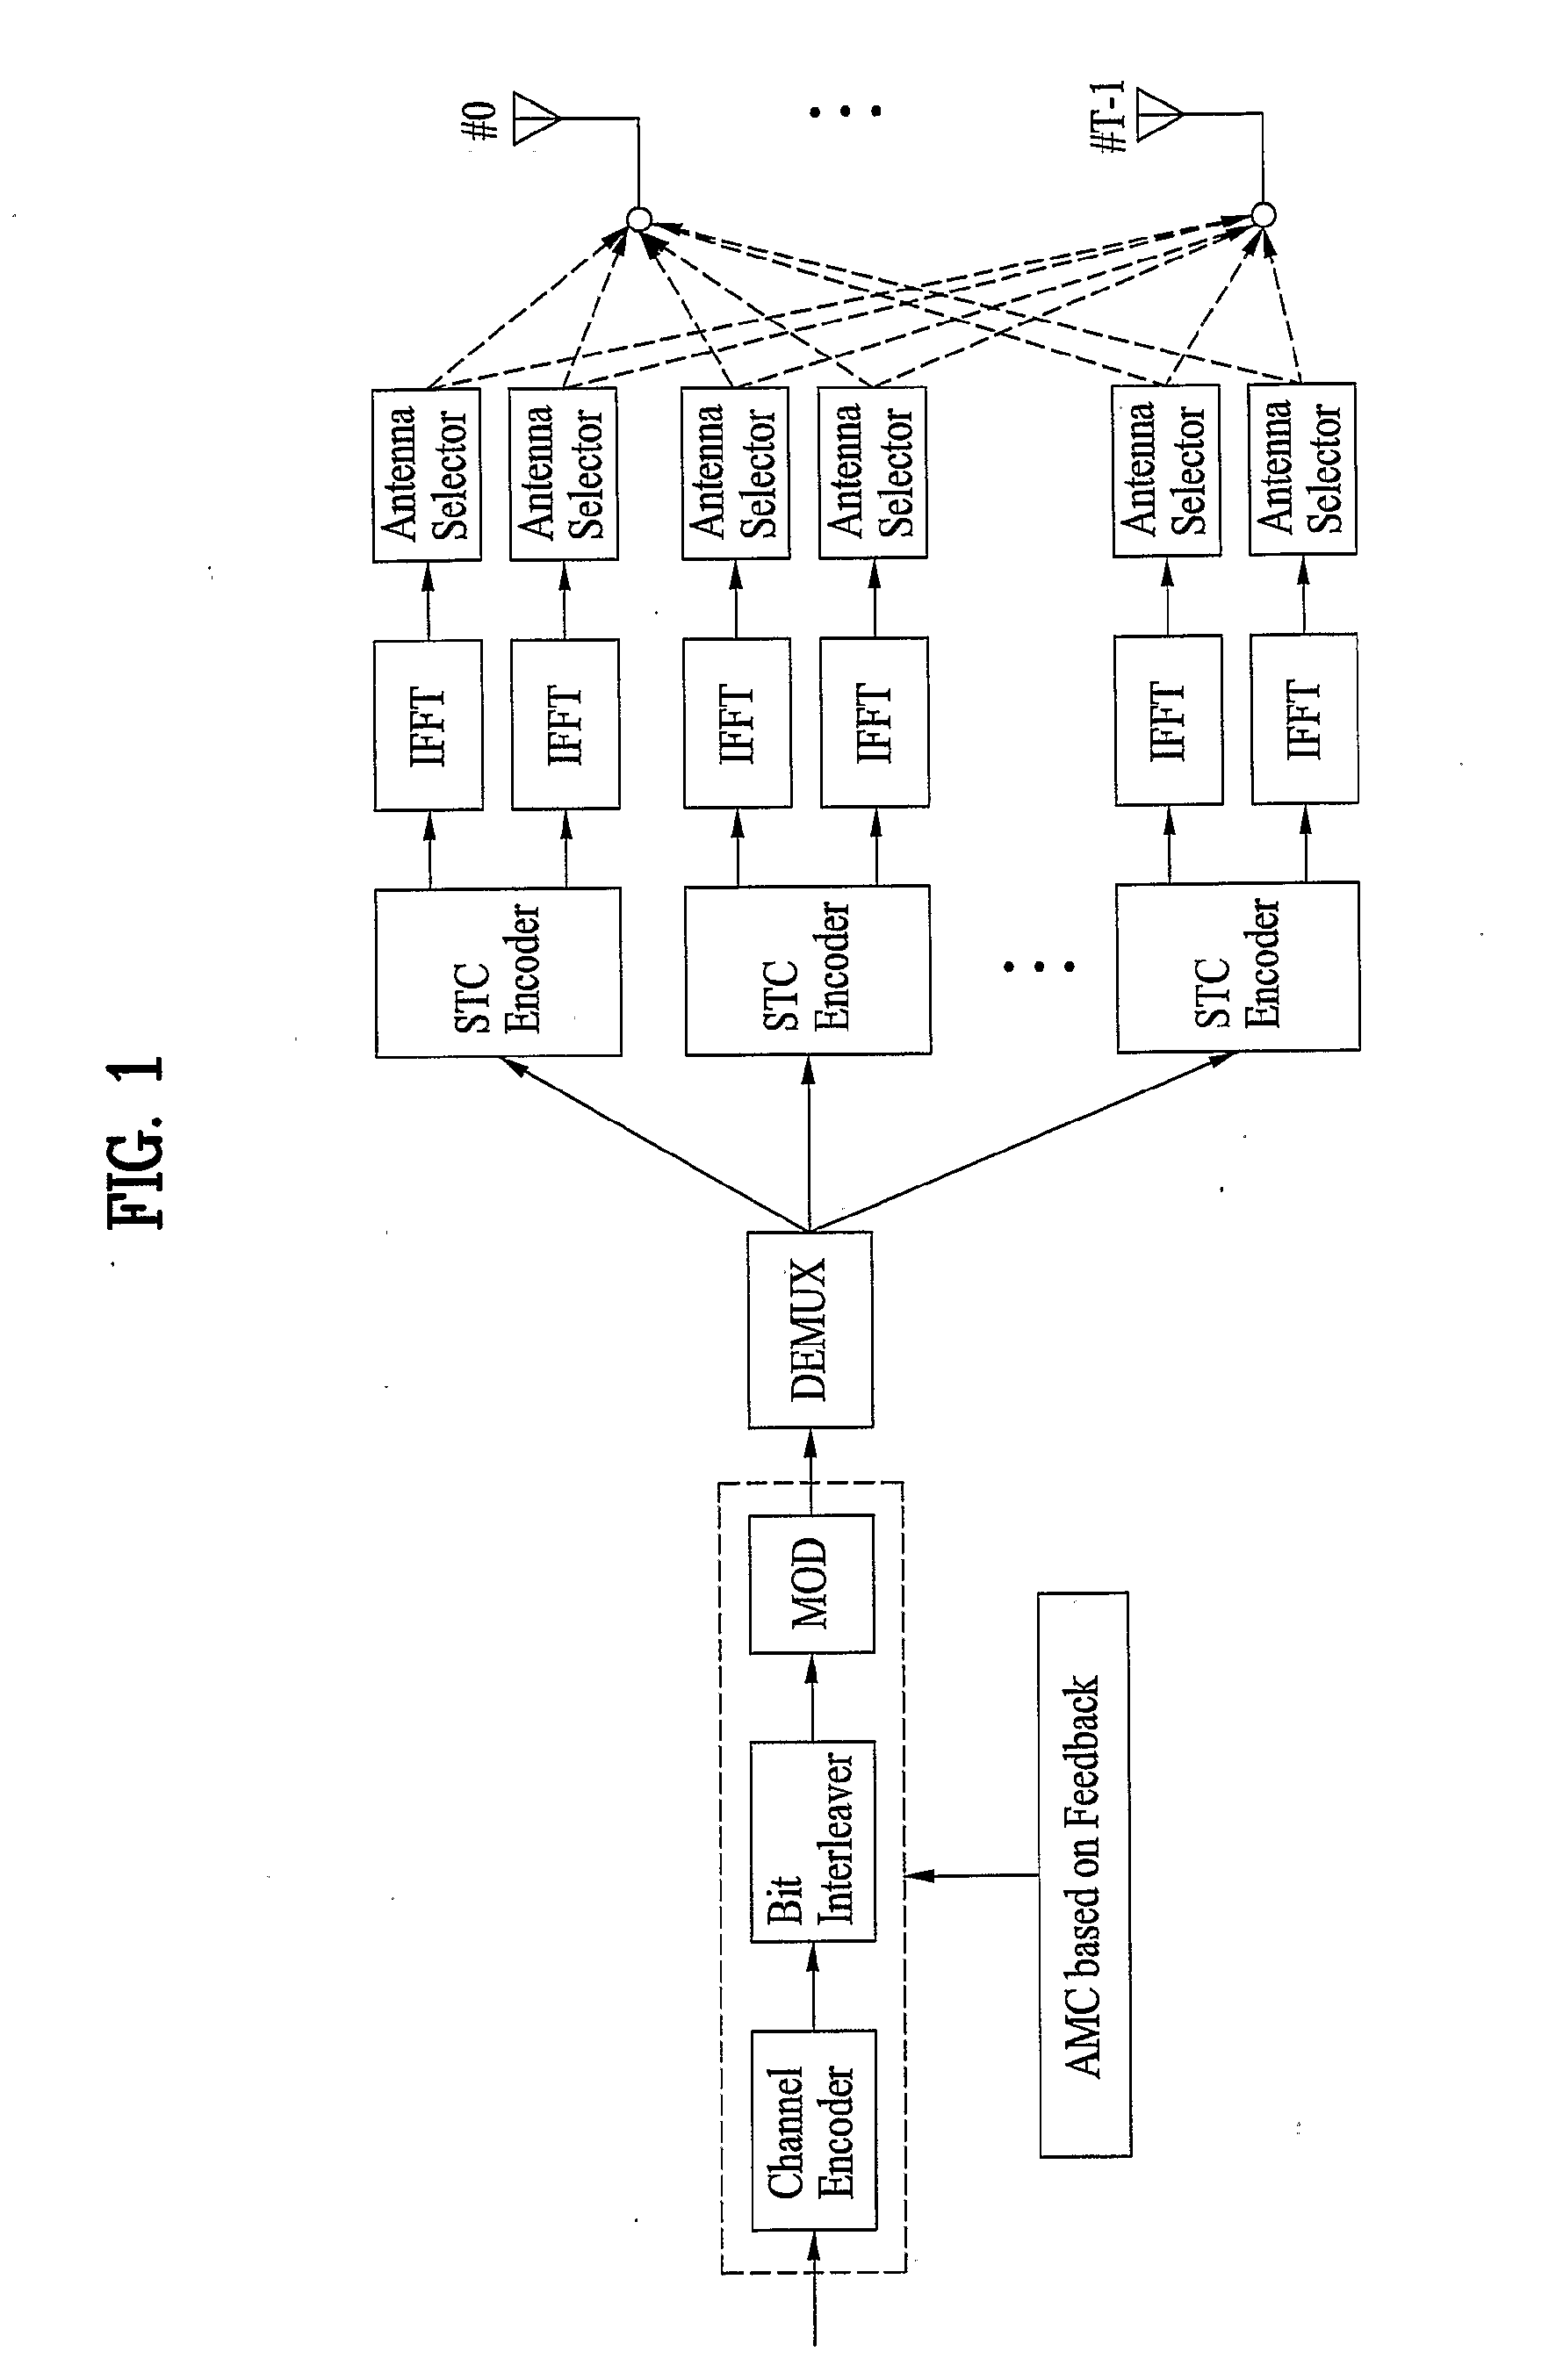 Method and apparatus for achieving transmit diversity and spatial multiplexing using antenna selection based on feedback information